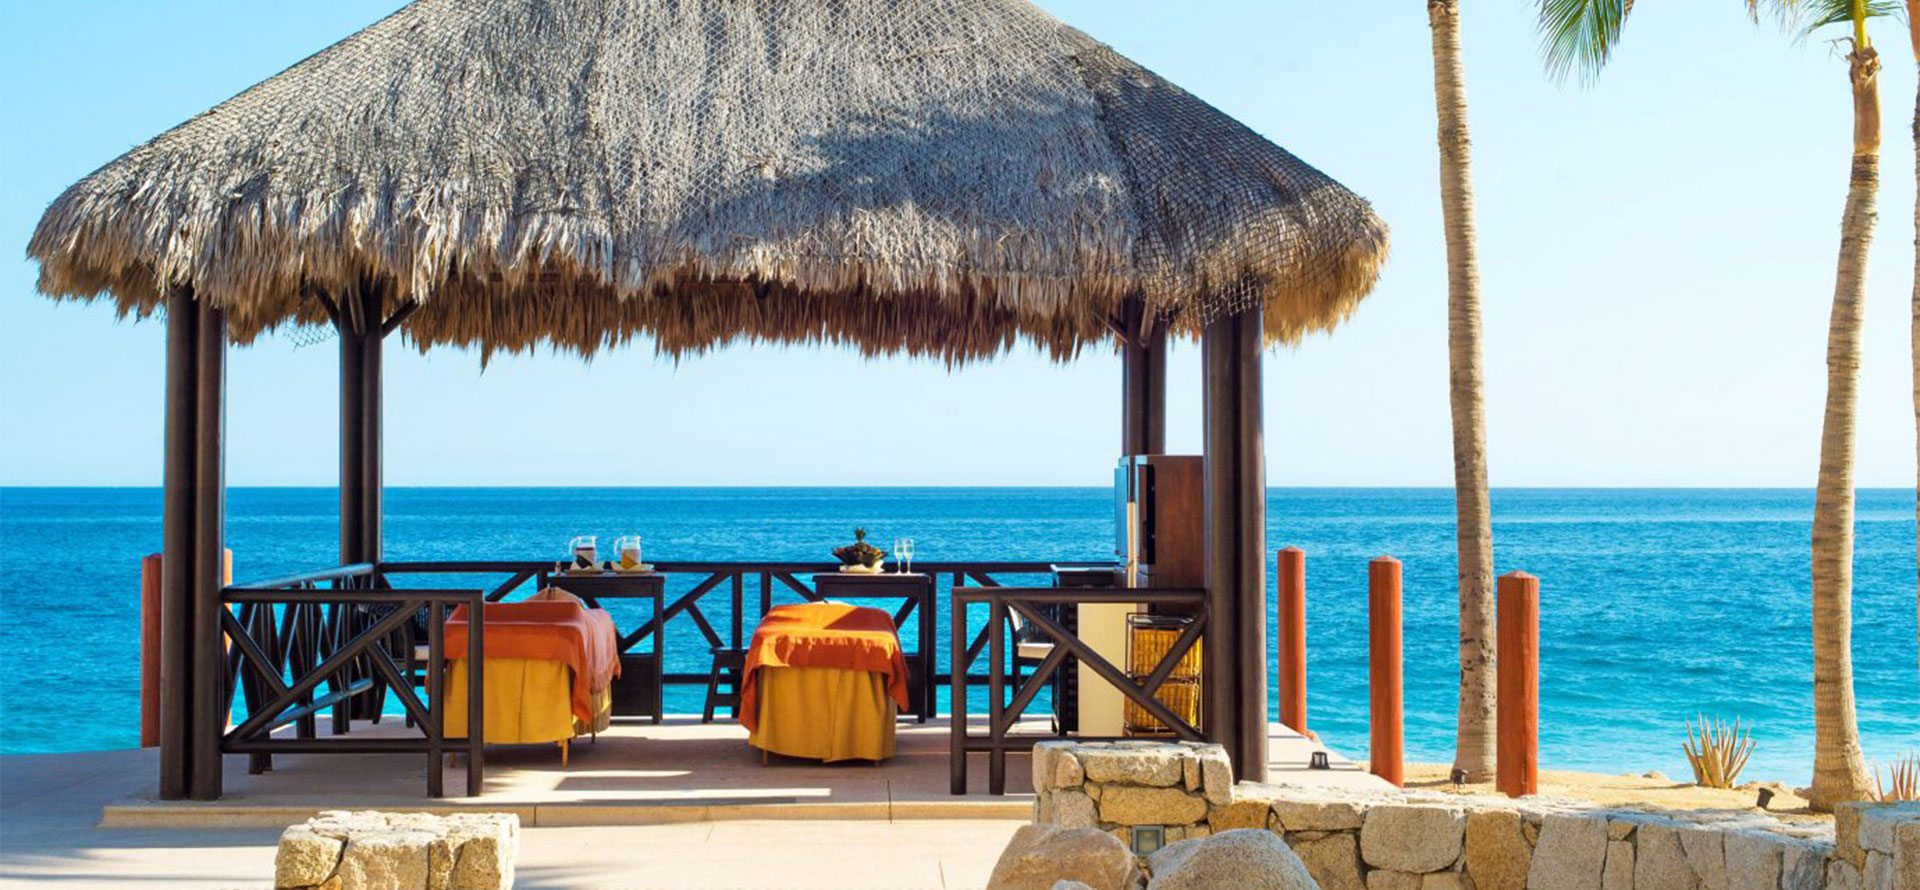 Cabo san lucas all inclusive family resort bungalow.